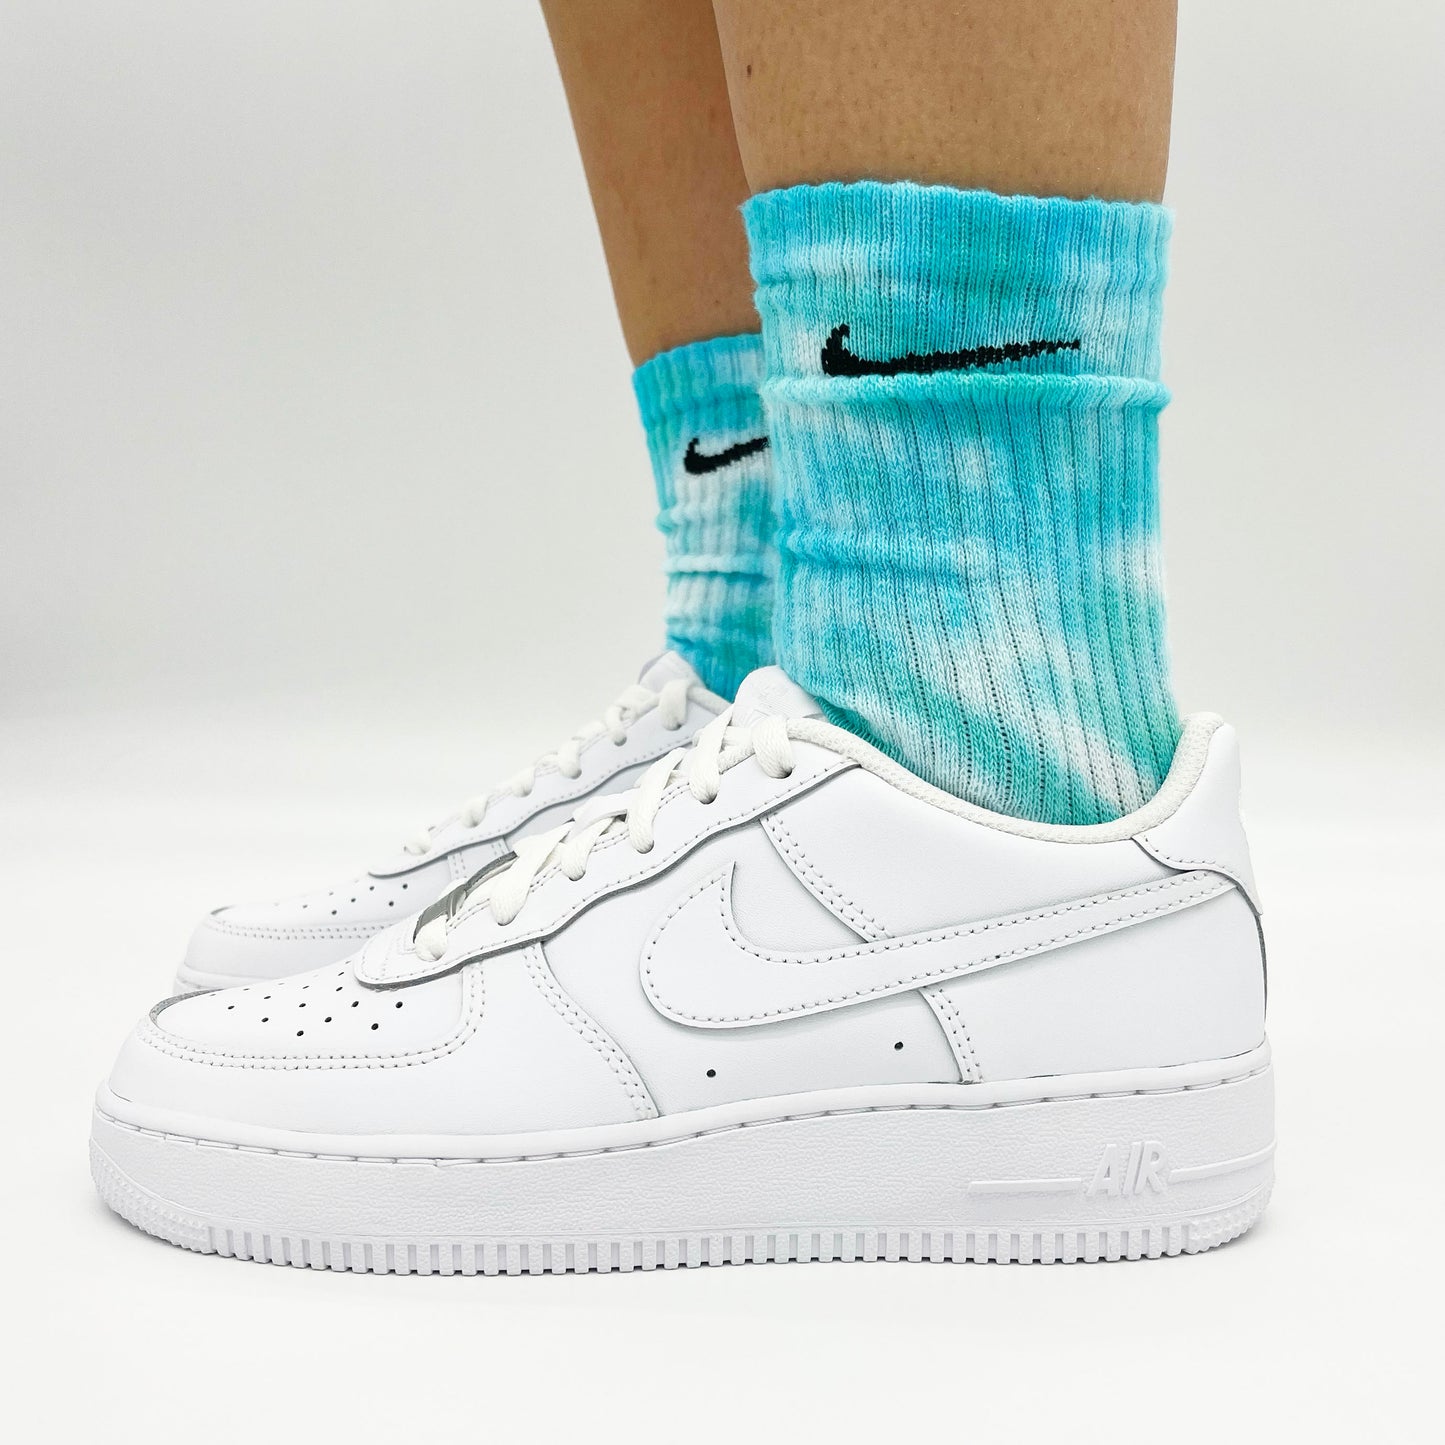 Chaussettes Nike Tie and Dye Turquoise